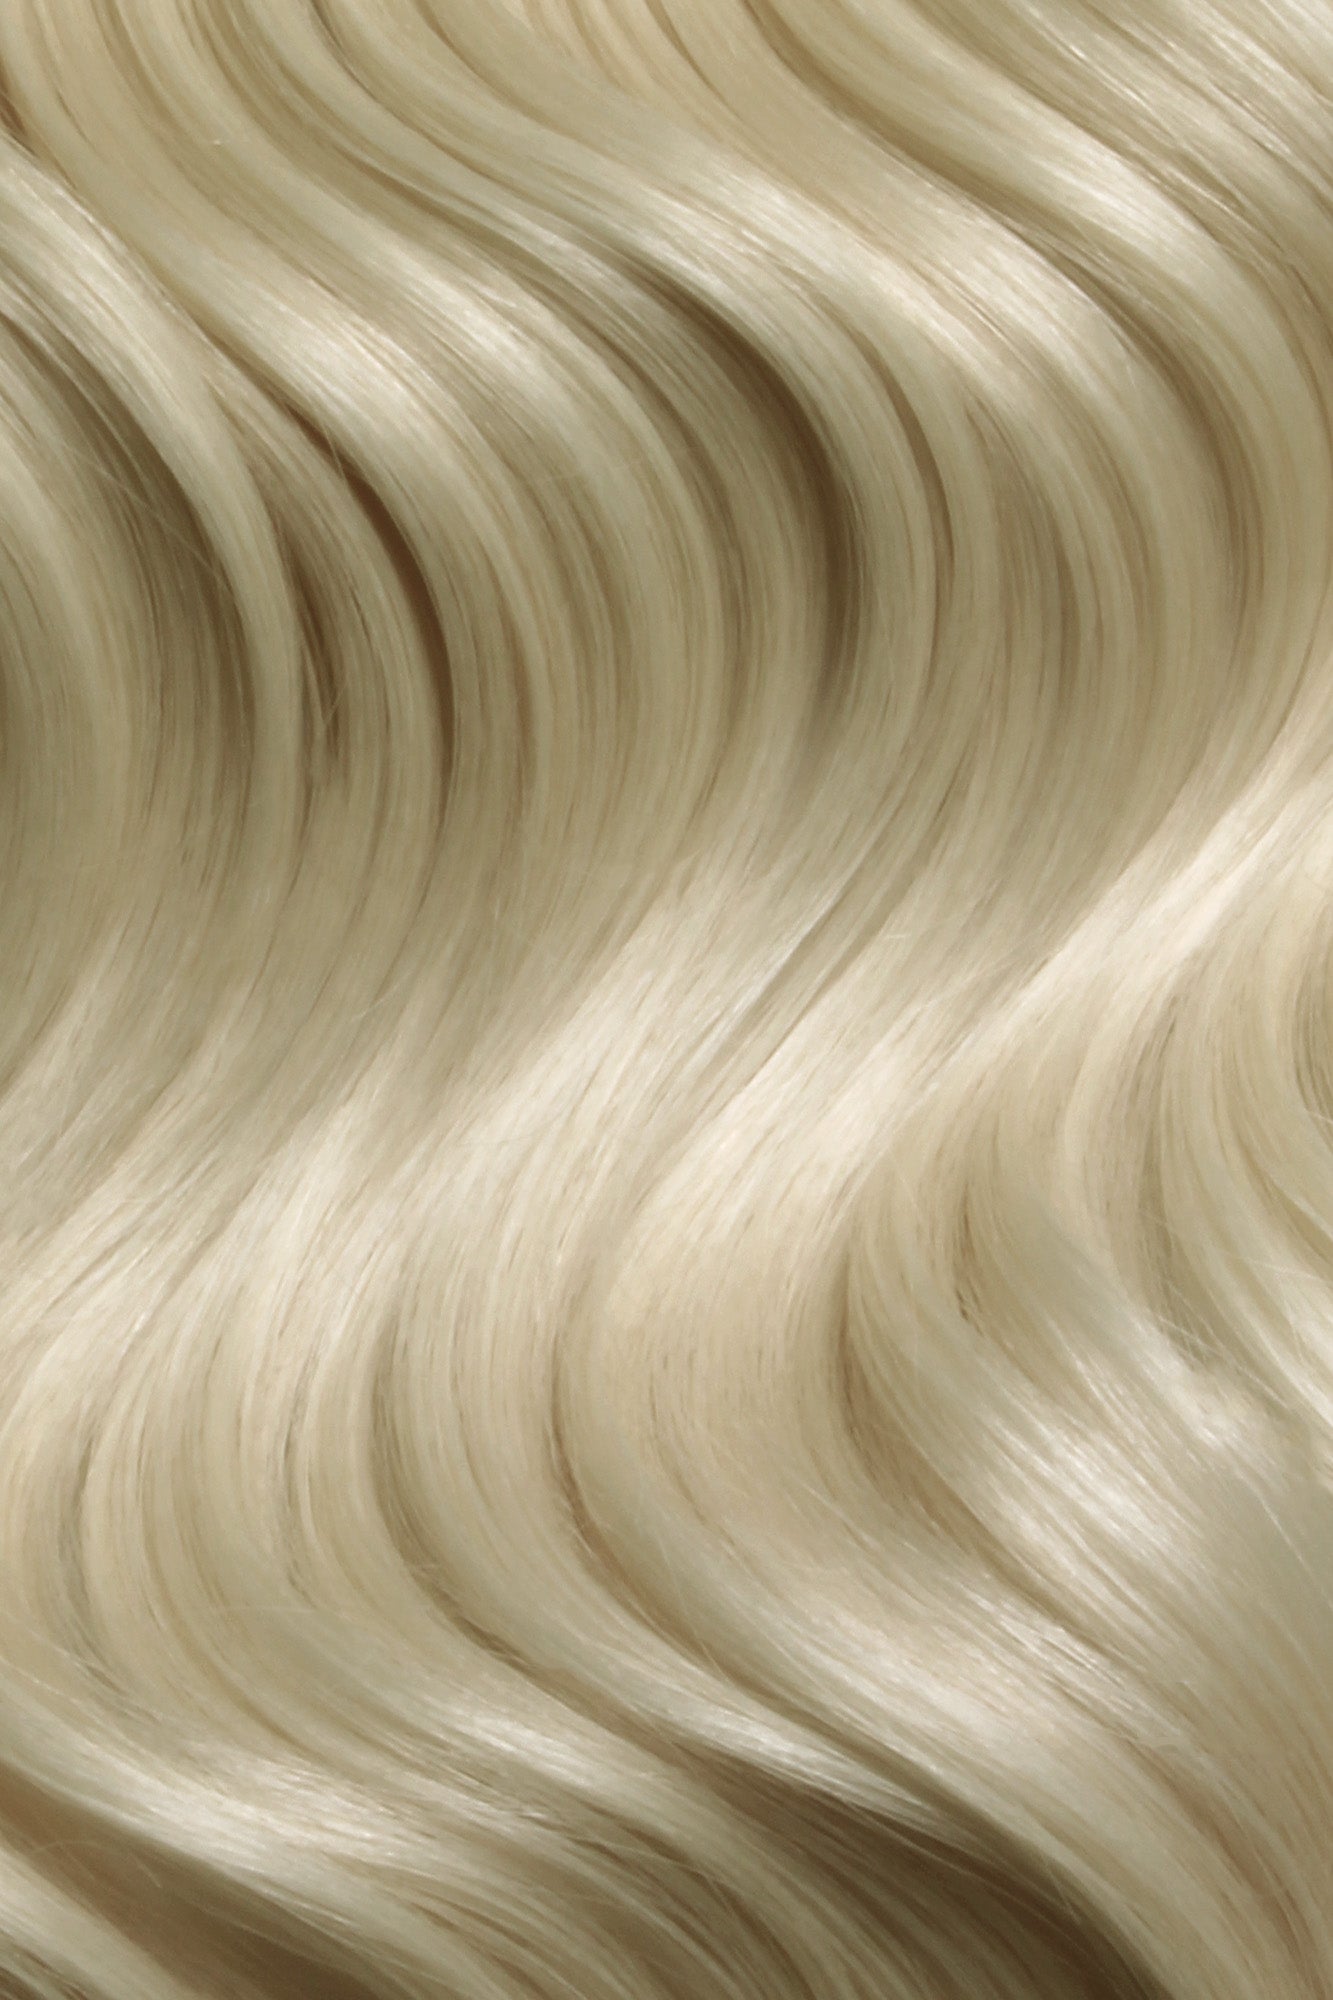 SEAMLESS® Flat Weft 22 Inches - SWAY Hair Extensions Sandy-Blonde-60 Natural SEAMLESS® Flat Weft 22 Inches extensions. Thin, flexible, and discreet. 100% Double Drawn Remy Human Hair. Versatile and reusable